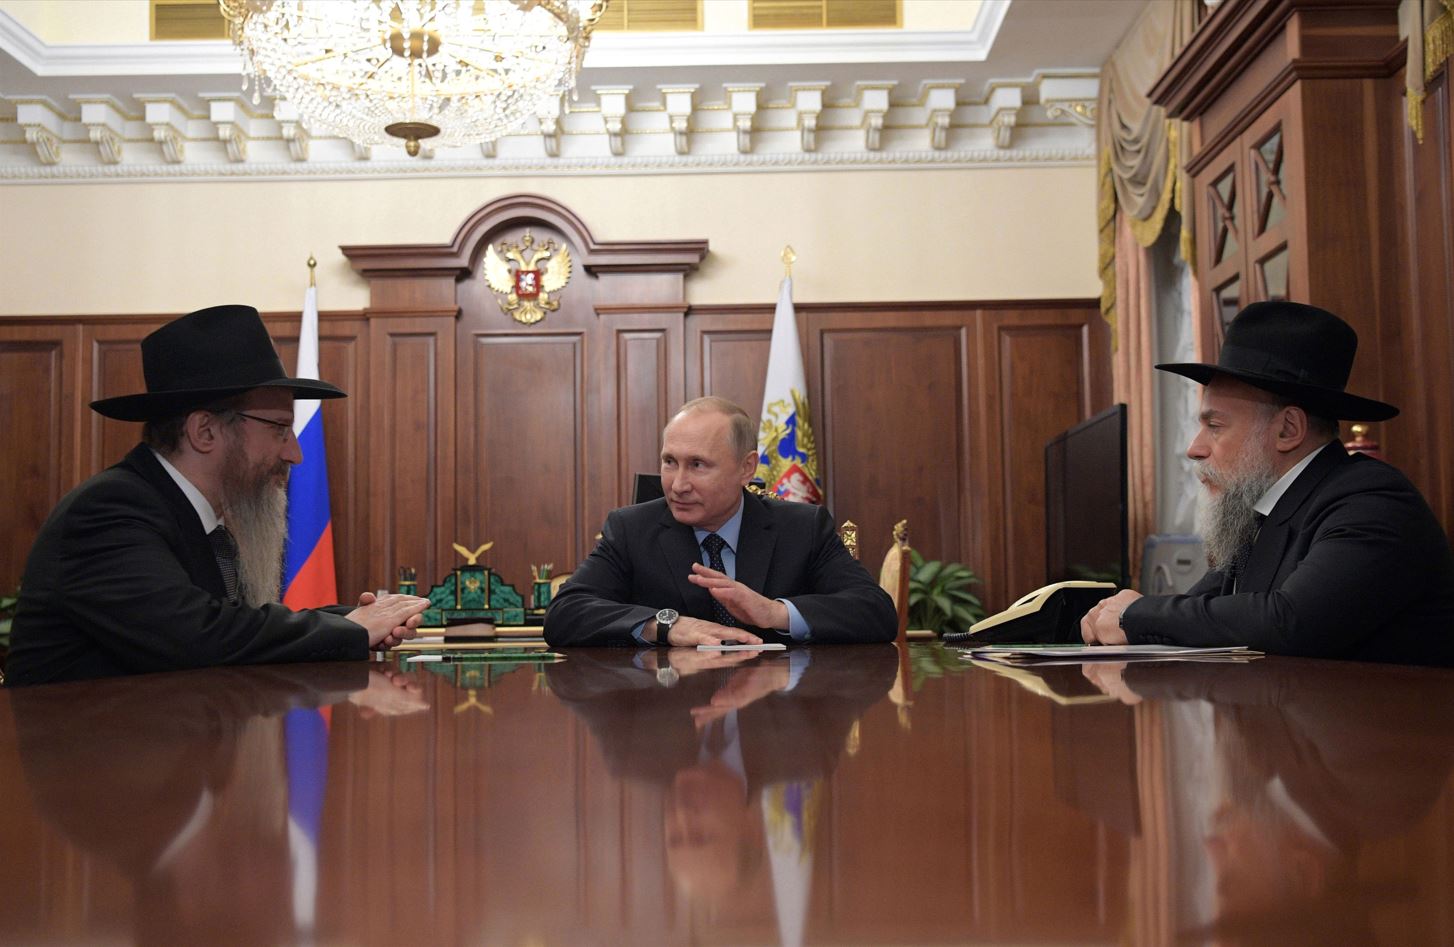 Vladimir Putin speaks with Berel Lazar, the chief rabbi of Russia, and Alexander Boroda, head of the Jewish Communities&#8217; Federation, in Moscow in 2016. ALEXEI DRUZHININ/AFP via Getty Images.
